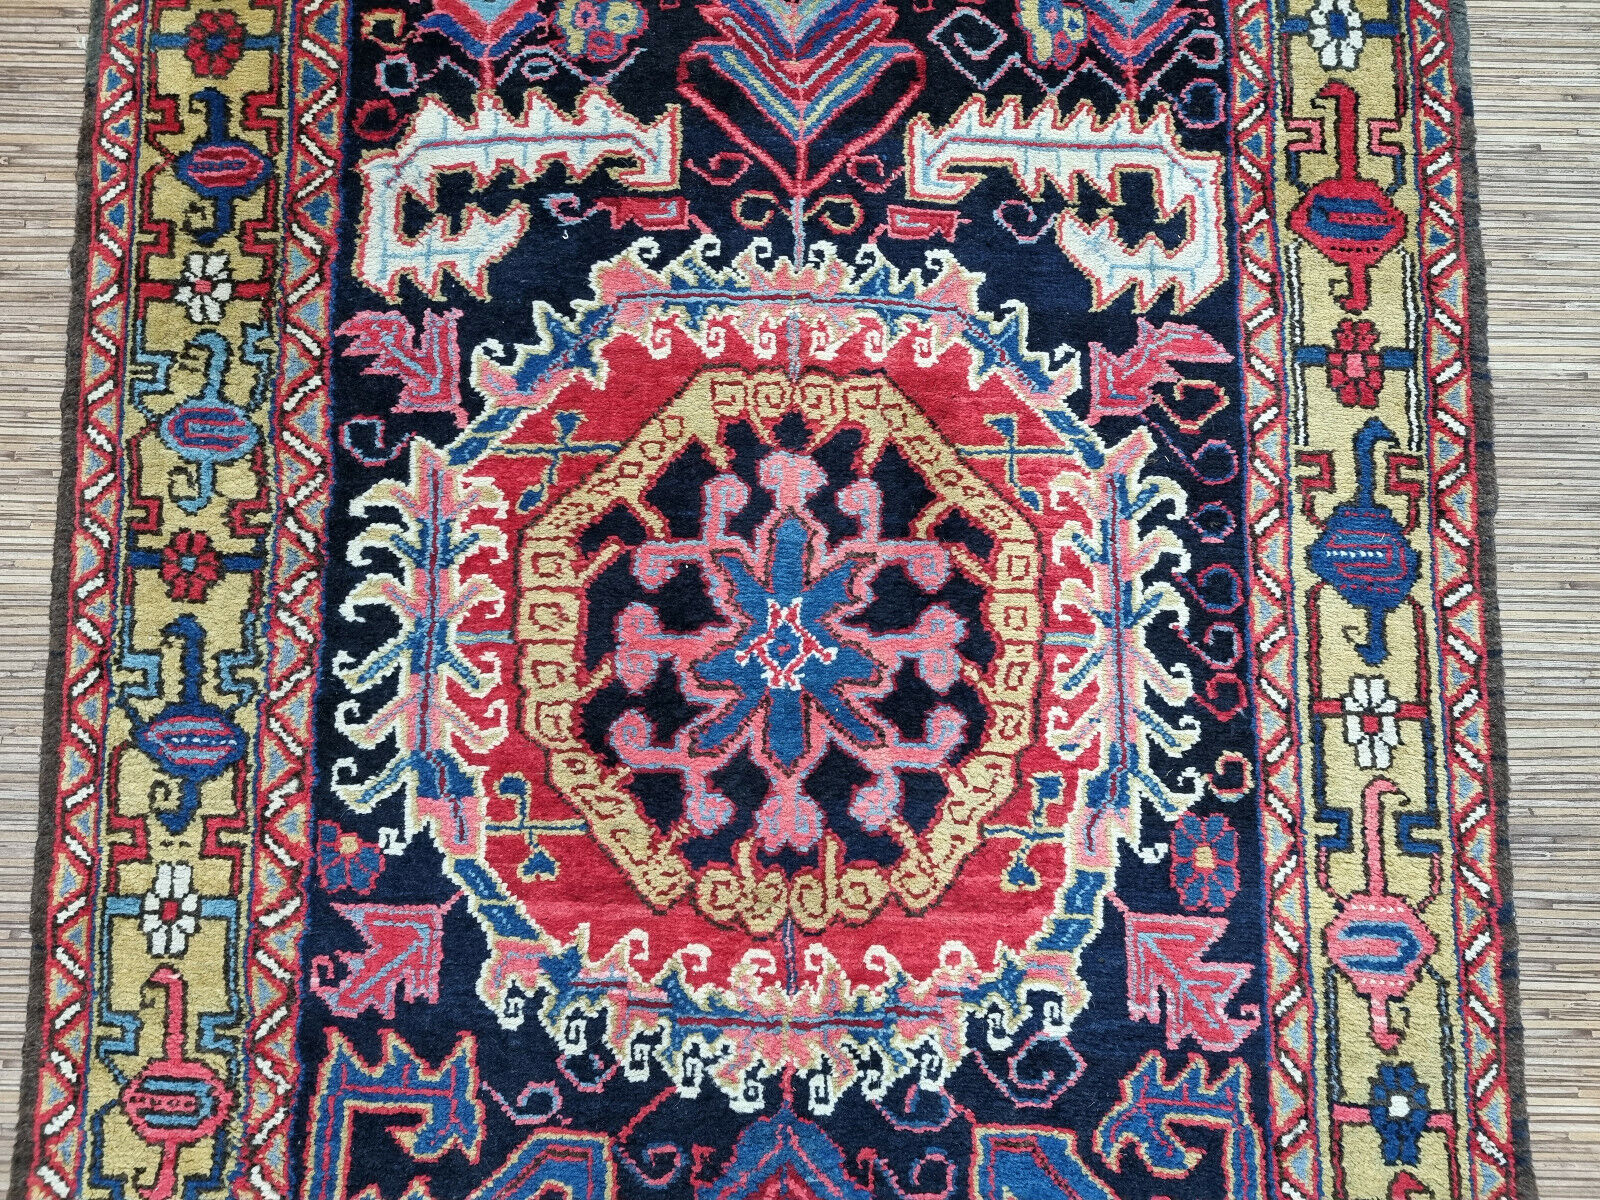 Close-up of bold and expressive design on Handmade Antique Persian Heriz Runner Rug - Detailed view emphasizing the bold and expressive design characteristic of the Persian Heriz style.